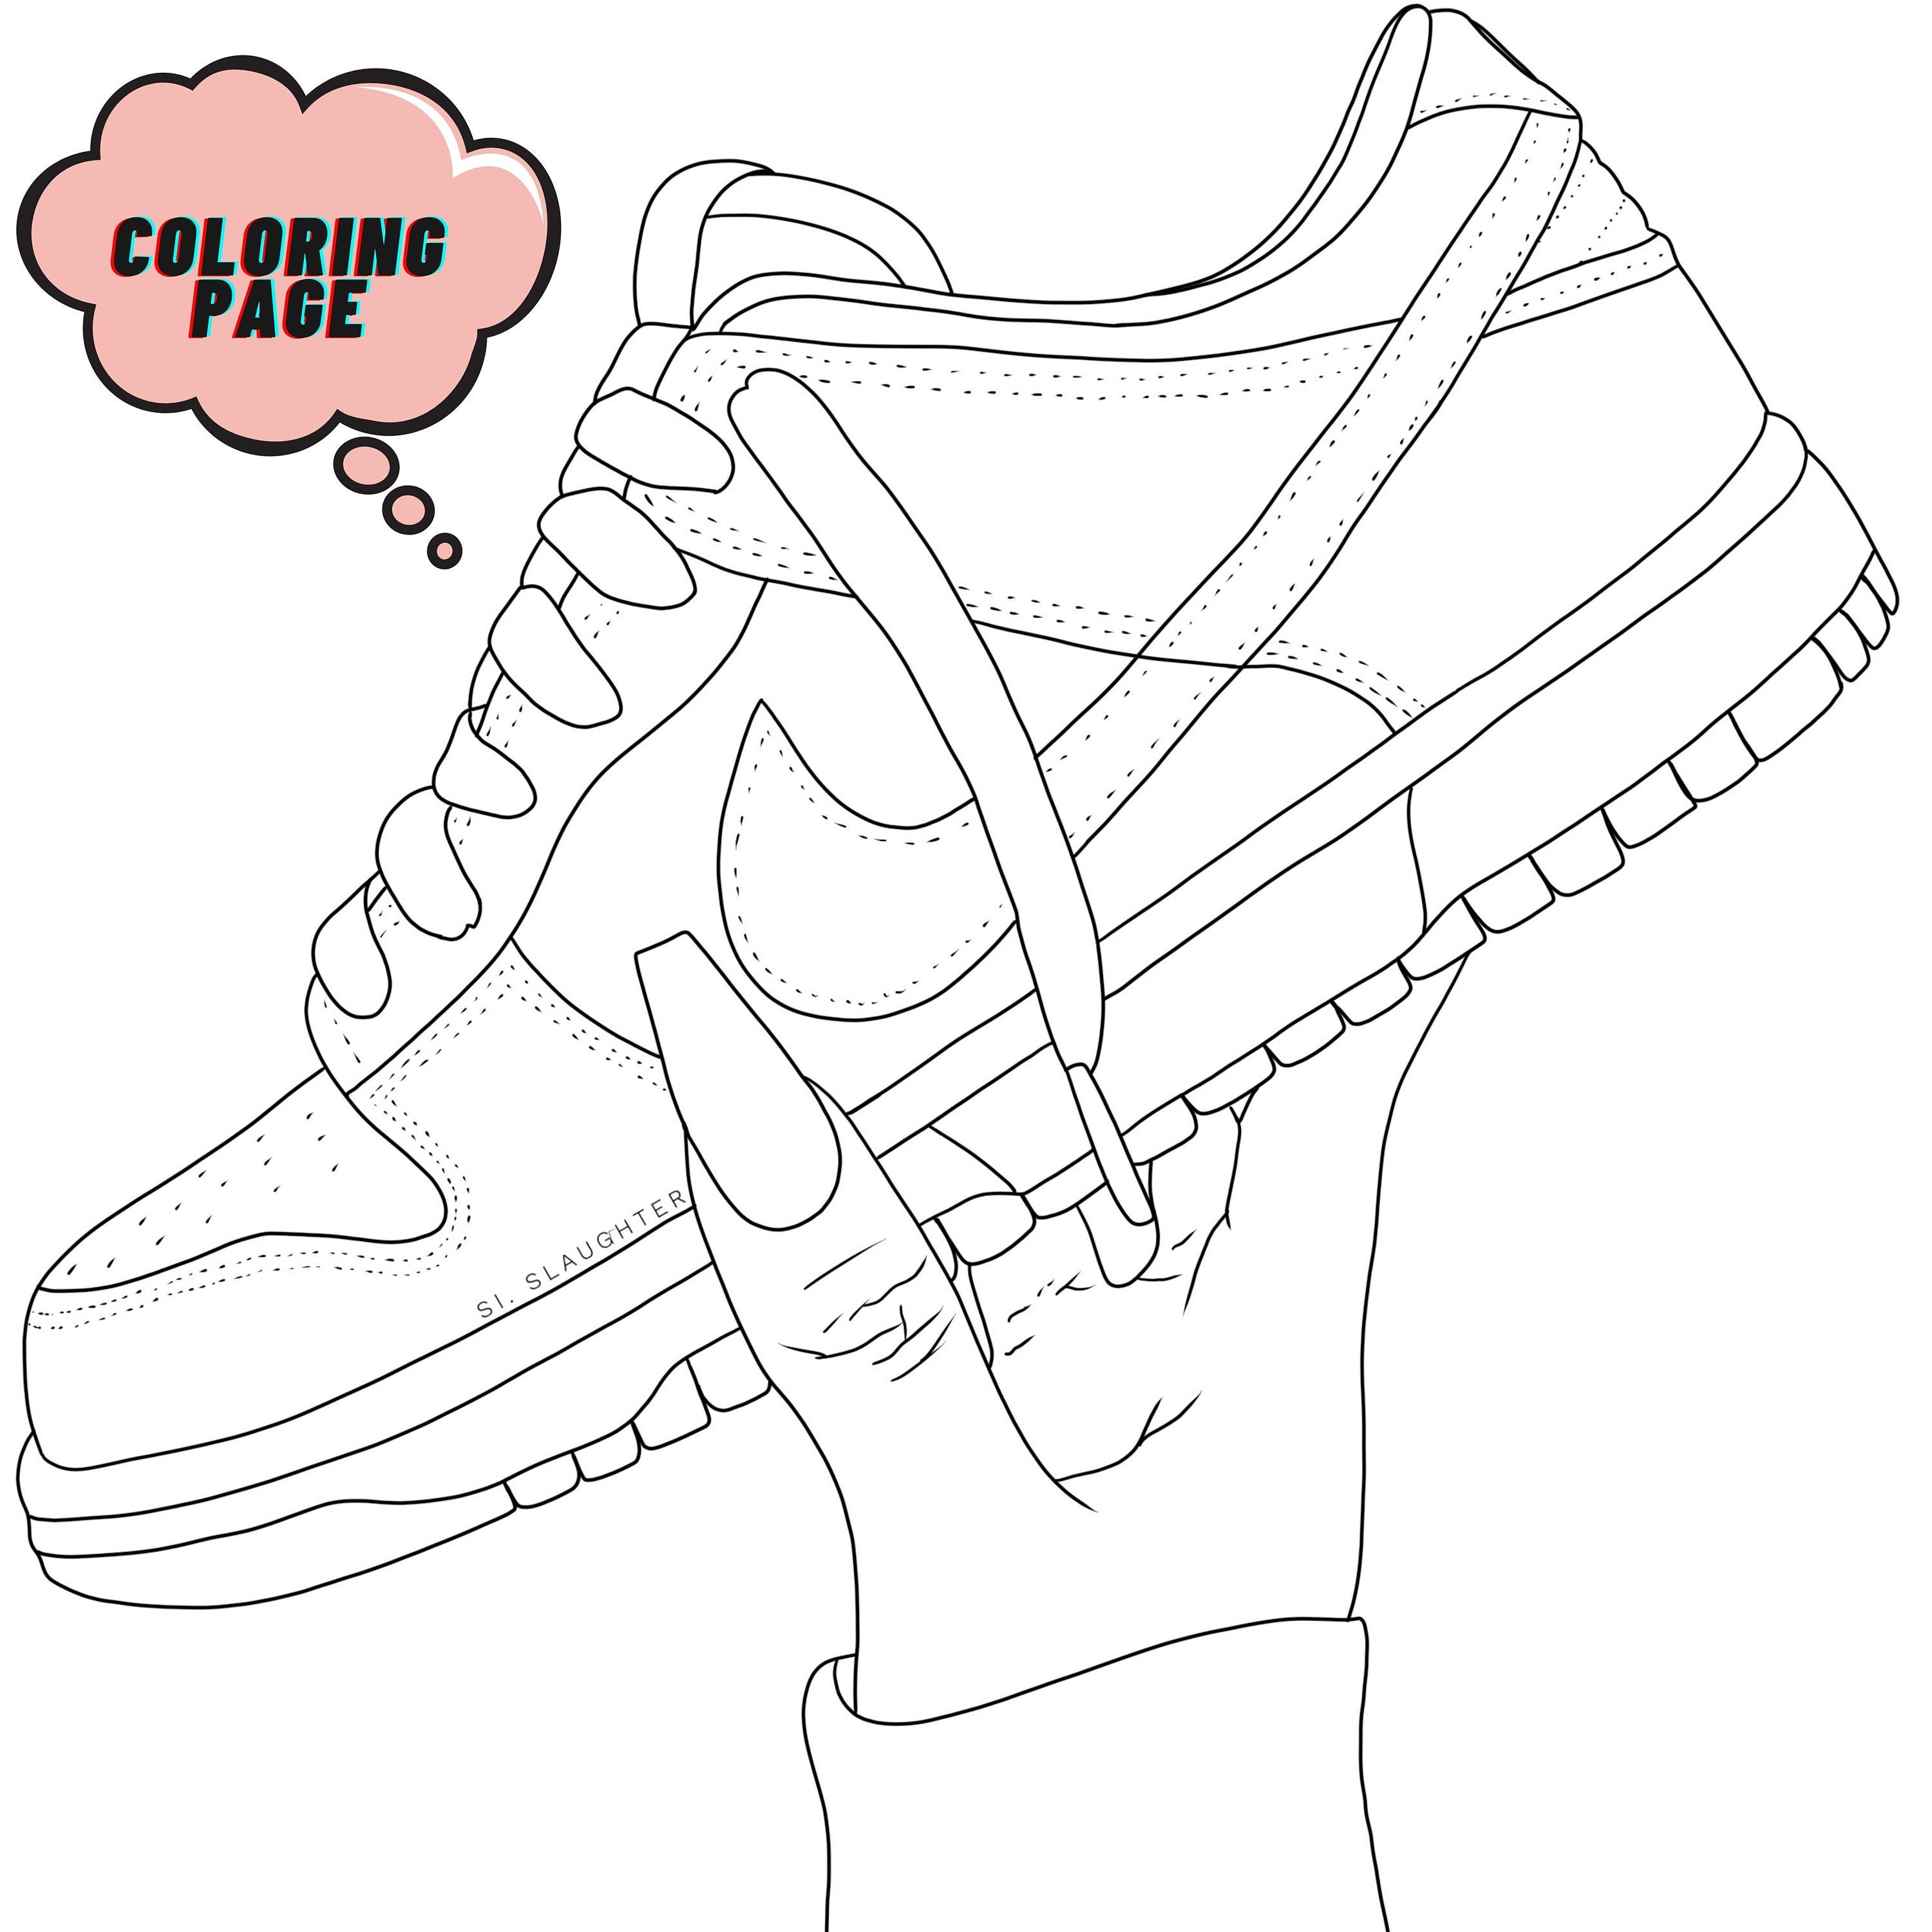 Sneaker Coloring Page - Etsy